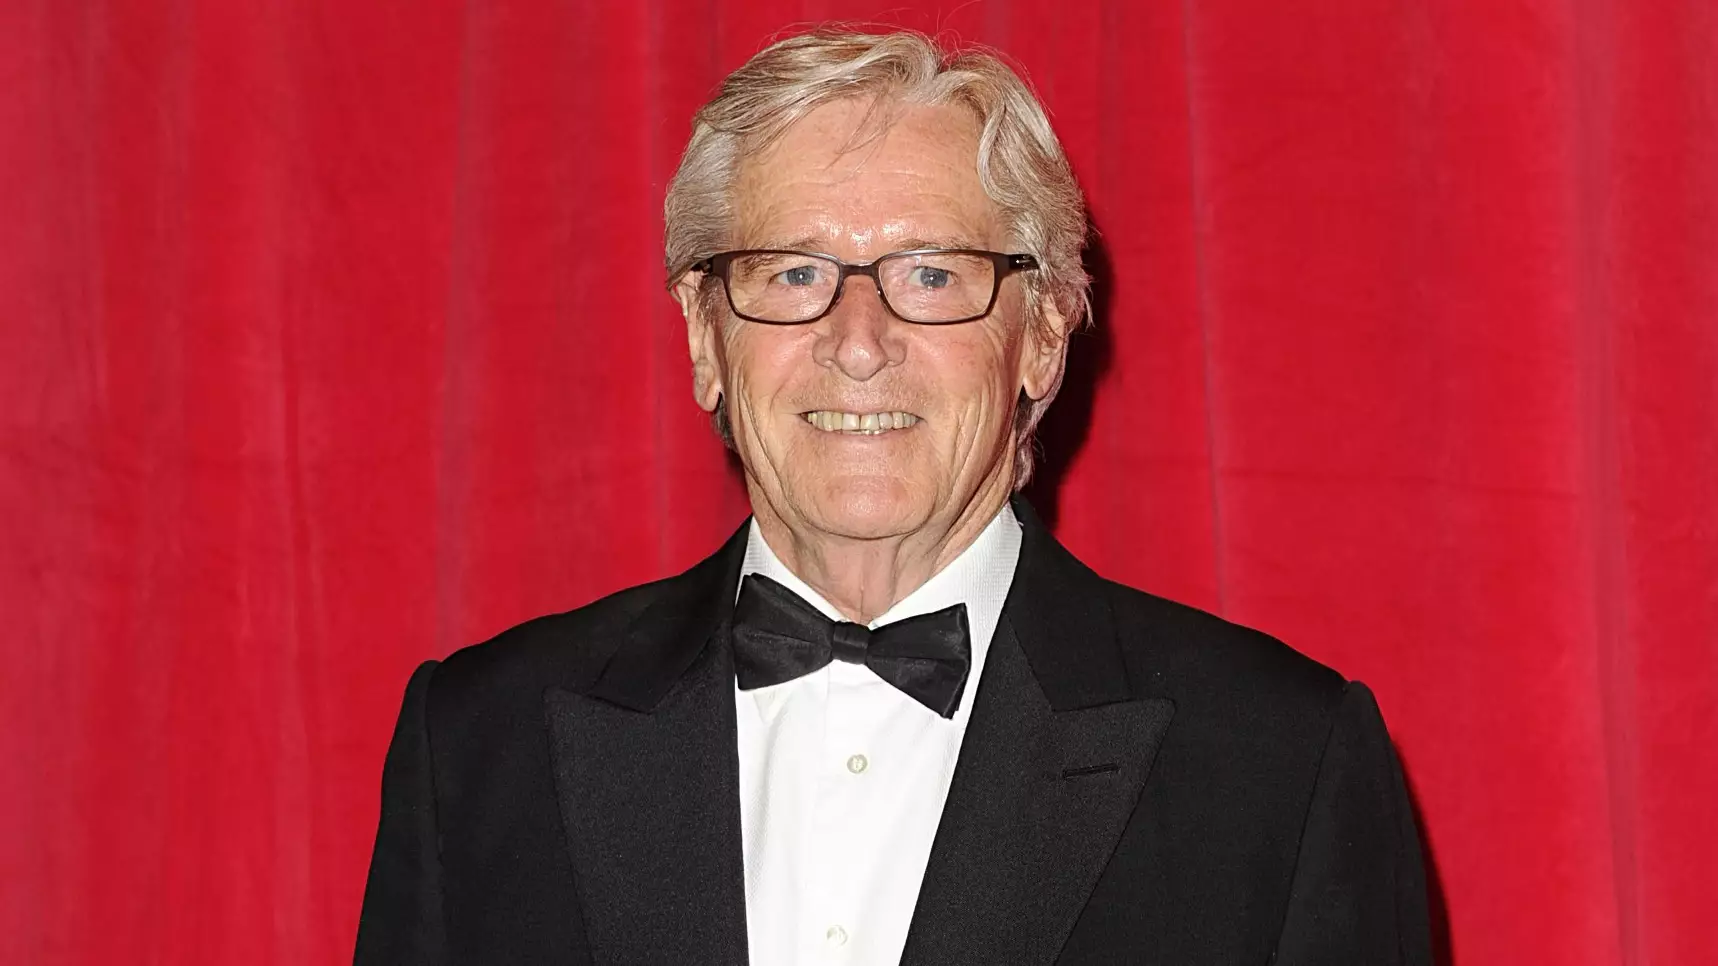 Coronation Street’s Bill Roache Victim To Death Hoax As Foreign Website Claims He’s Dead